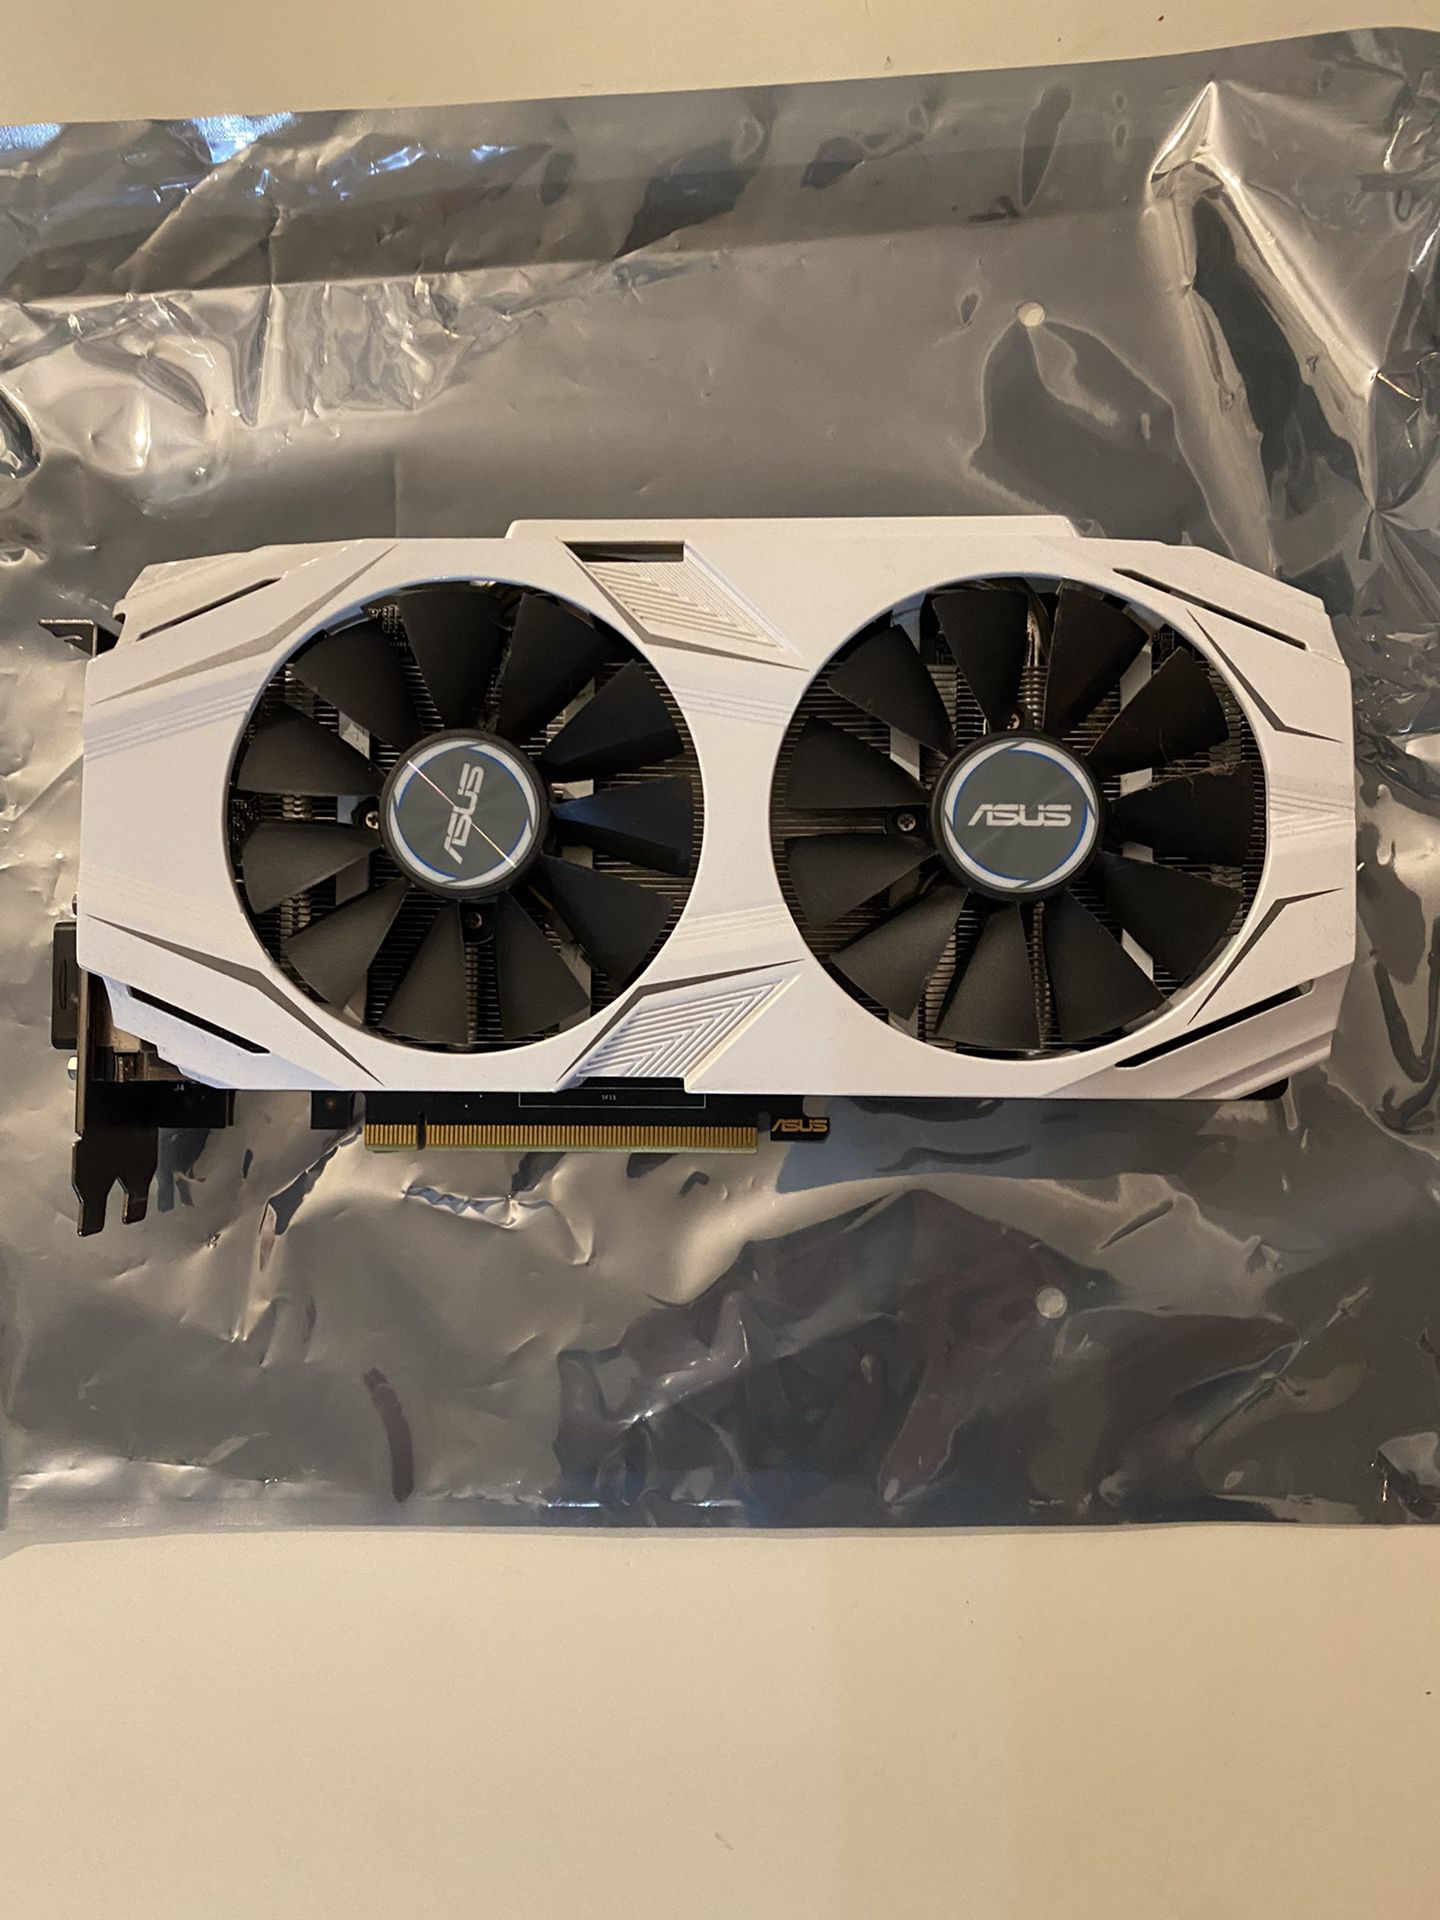 ASUS Nvidia GeForce Dual GTX 1060 3GB for Sale in CA - OfferUp